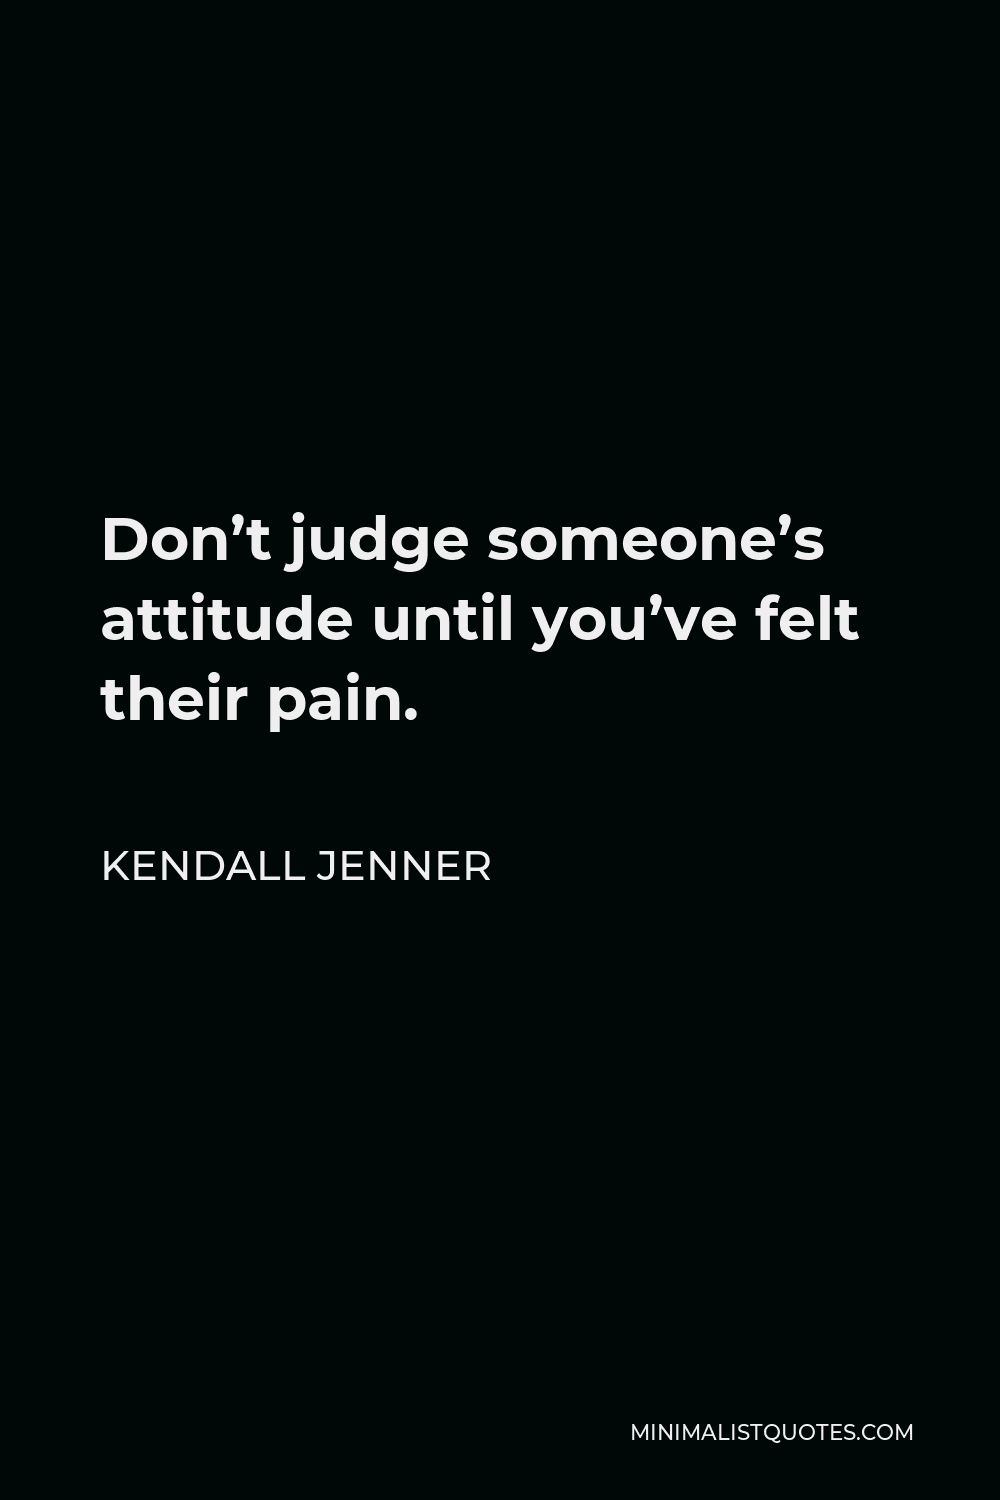 Kendall Jenner Quote - Don’t judge someone’s attitude until you’ve felt their pain.